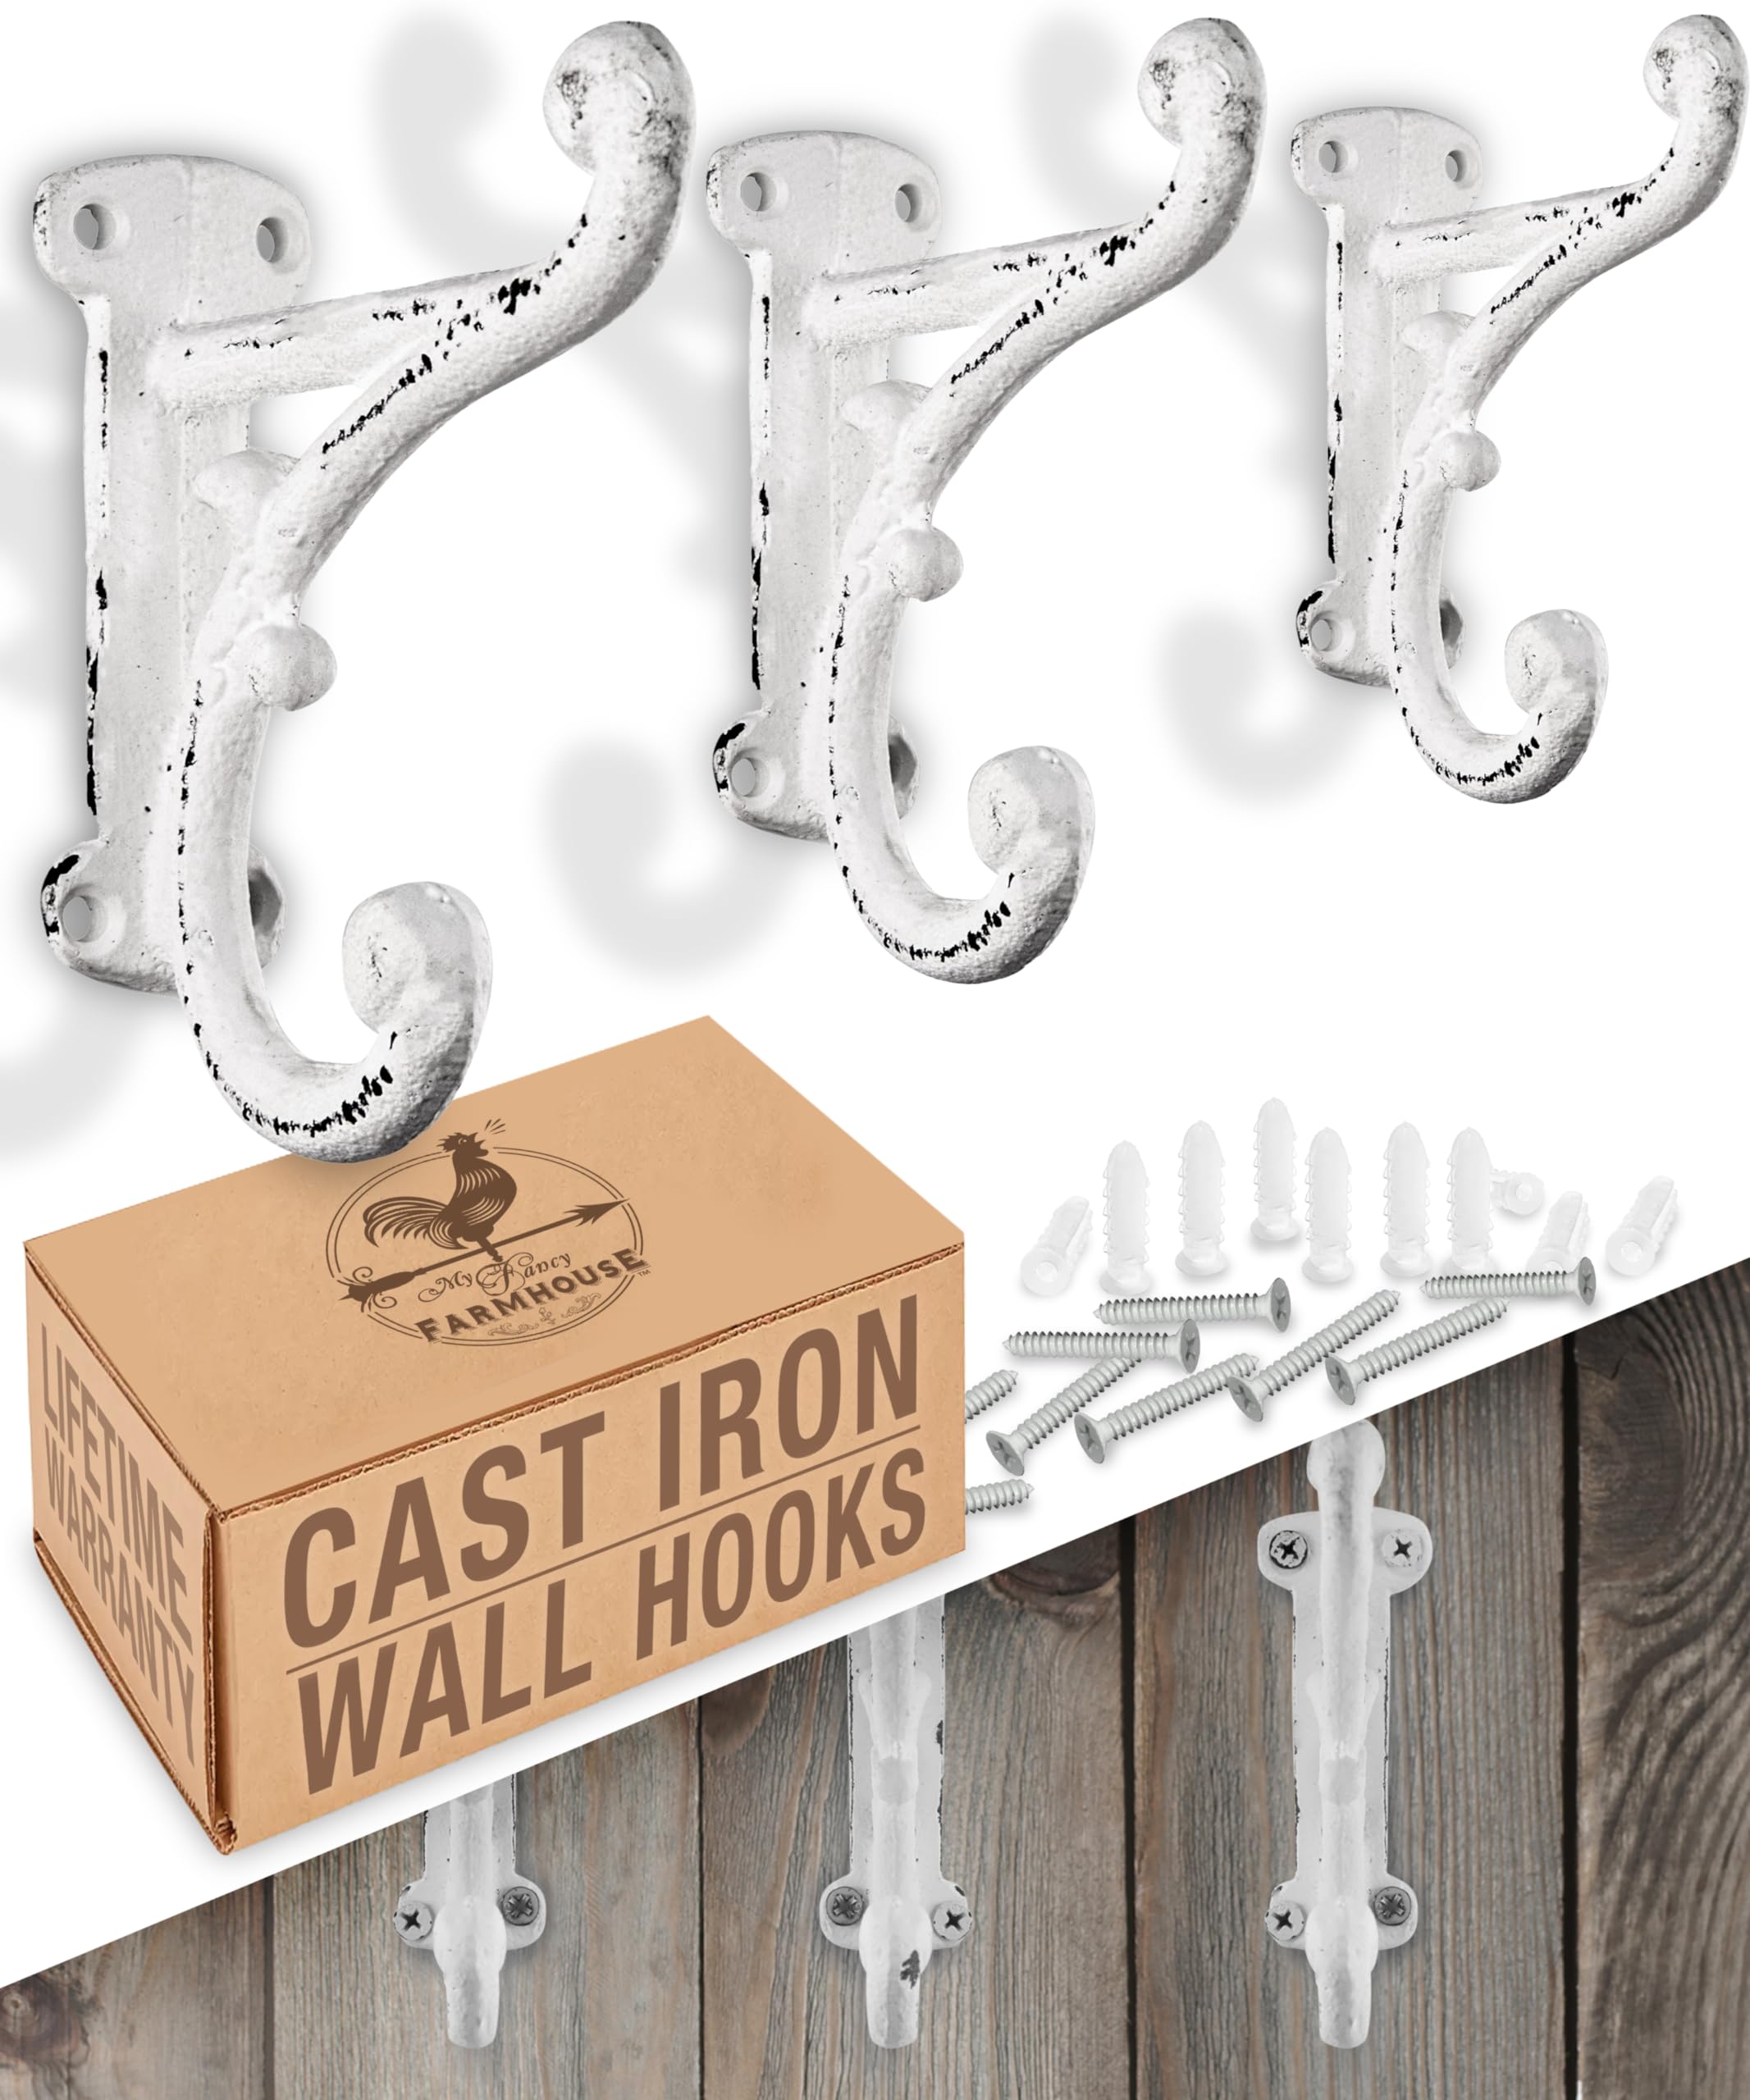 Fityle Decorative Rustic Cast Iron, Wall Mounted Coat Hooks Vintage  Inspired ,Modern Farmhouse ,Coats, Bags, Hats, Towels